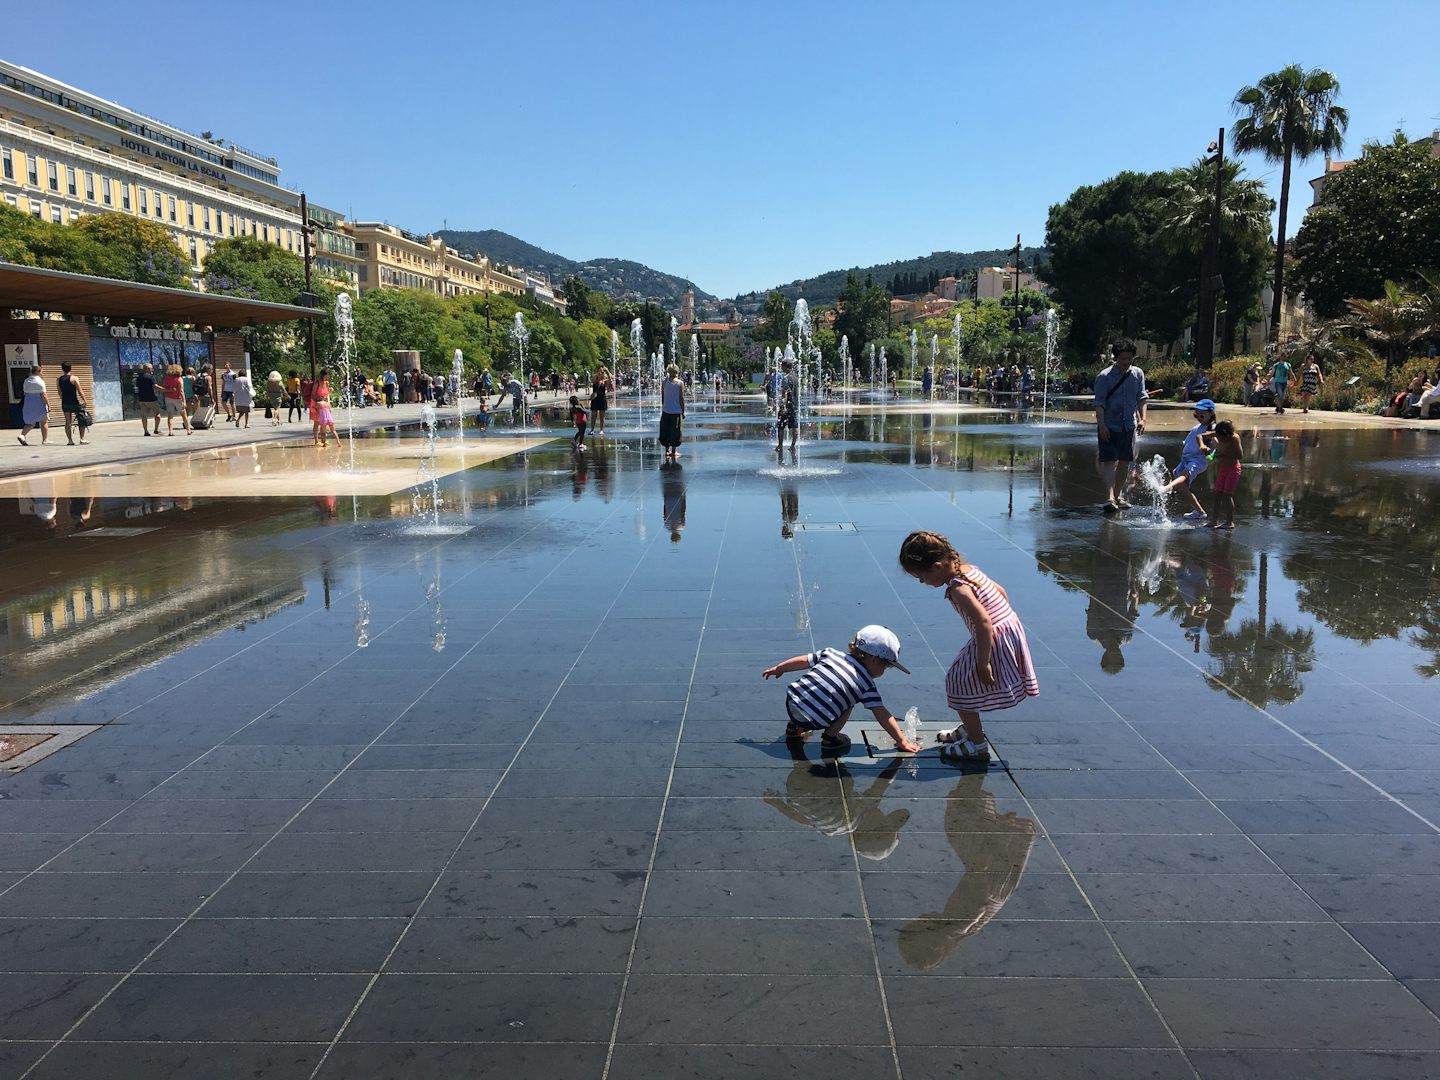 We loved the beautiful park in the center of Nice and were enchanted by the